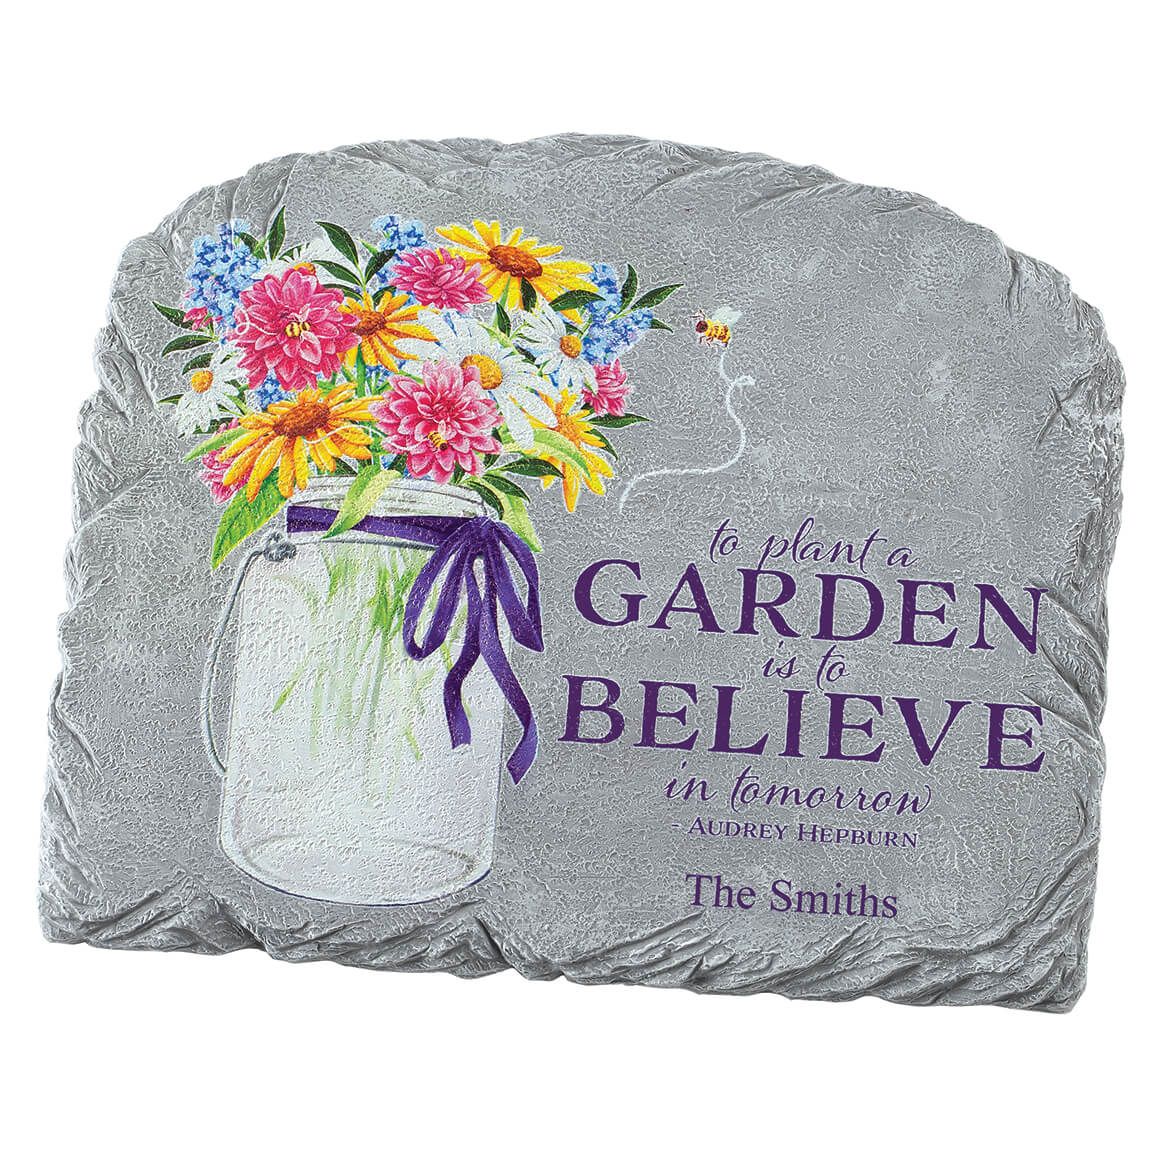 Personalized To Plant A Garden Stone + '-' + 371656